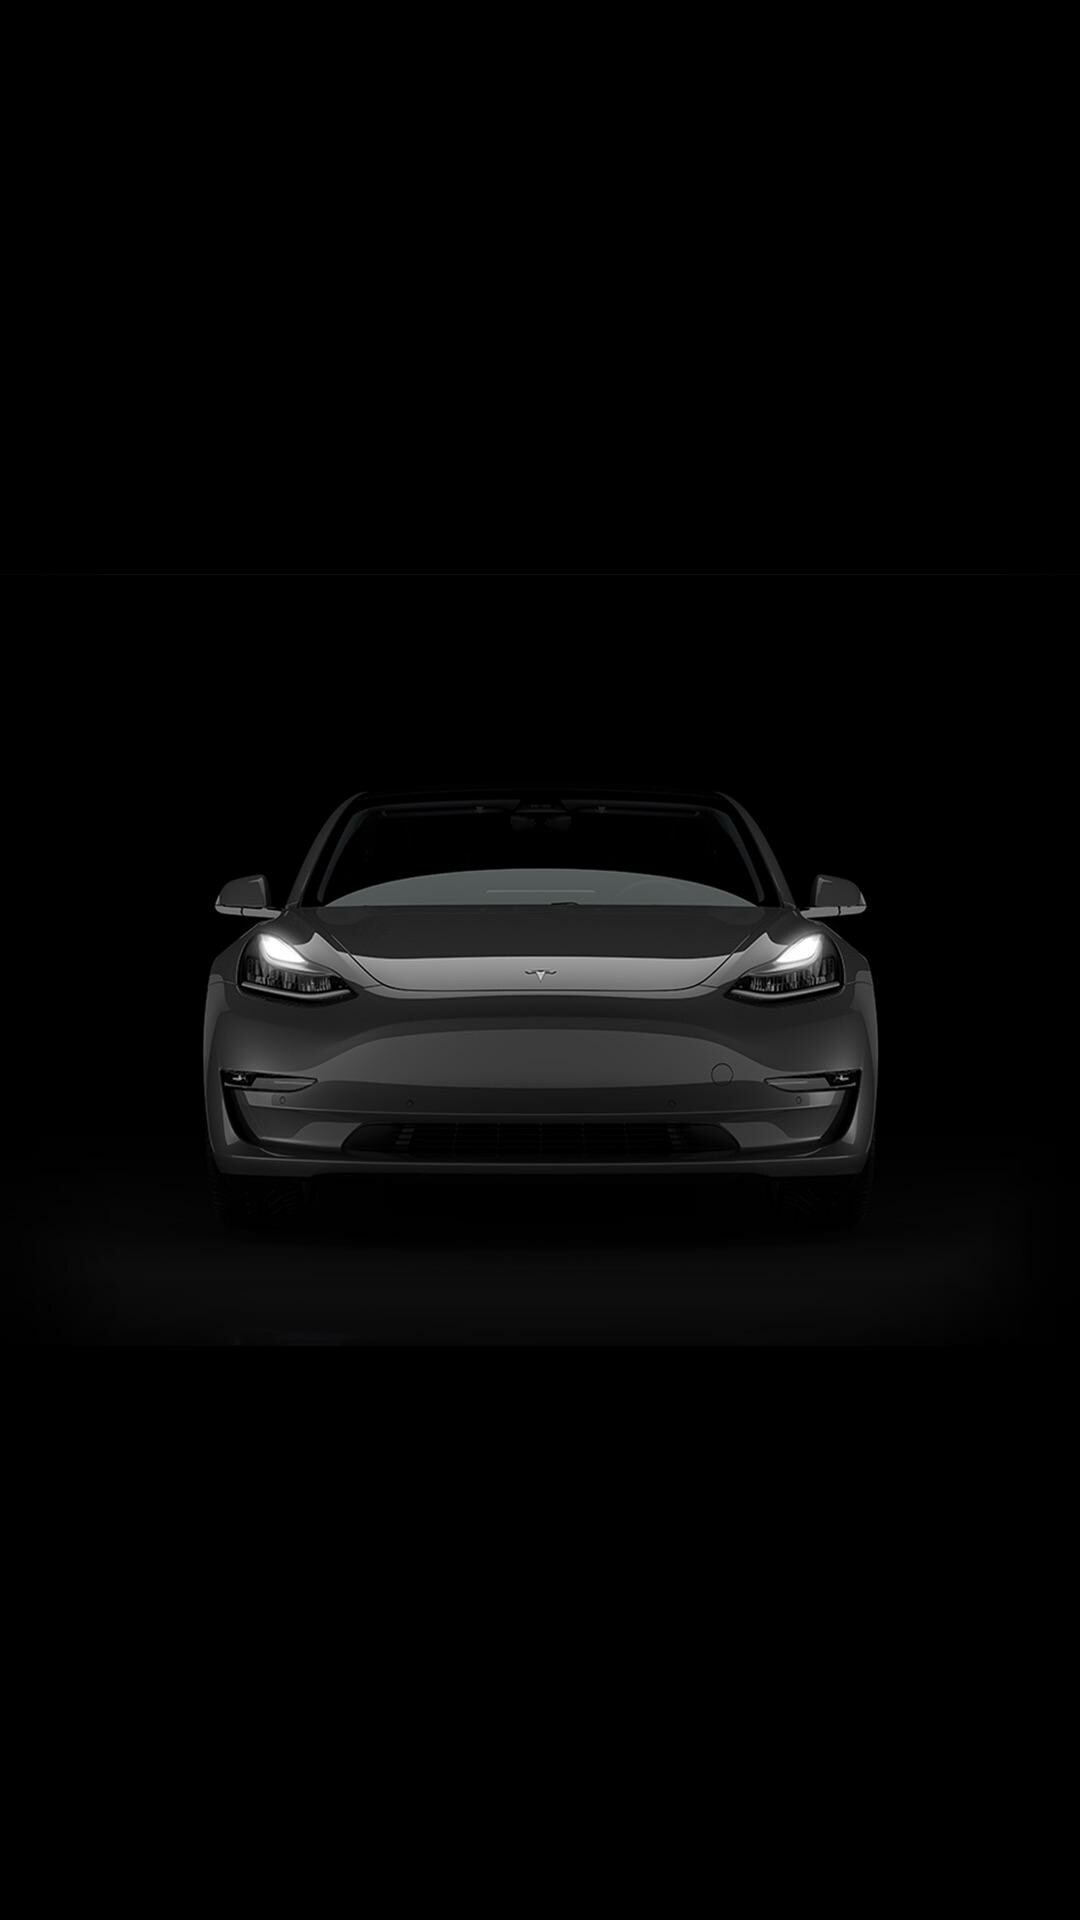 Tesla Model Y: An all-electric compact SUV built on third-generation vehicle platform. 1080x1920 Full HD Background.